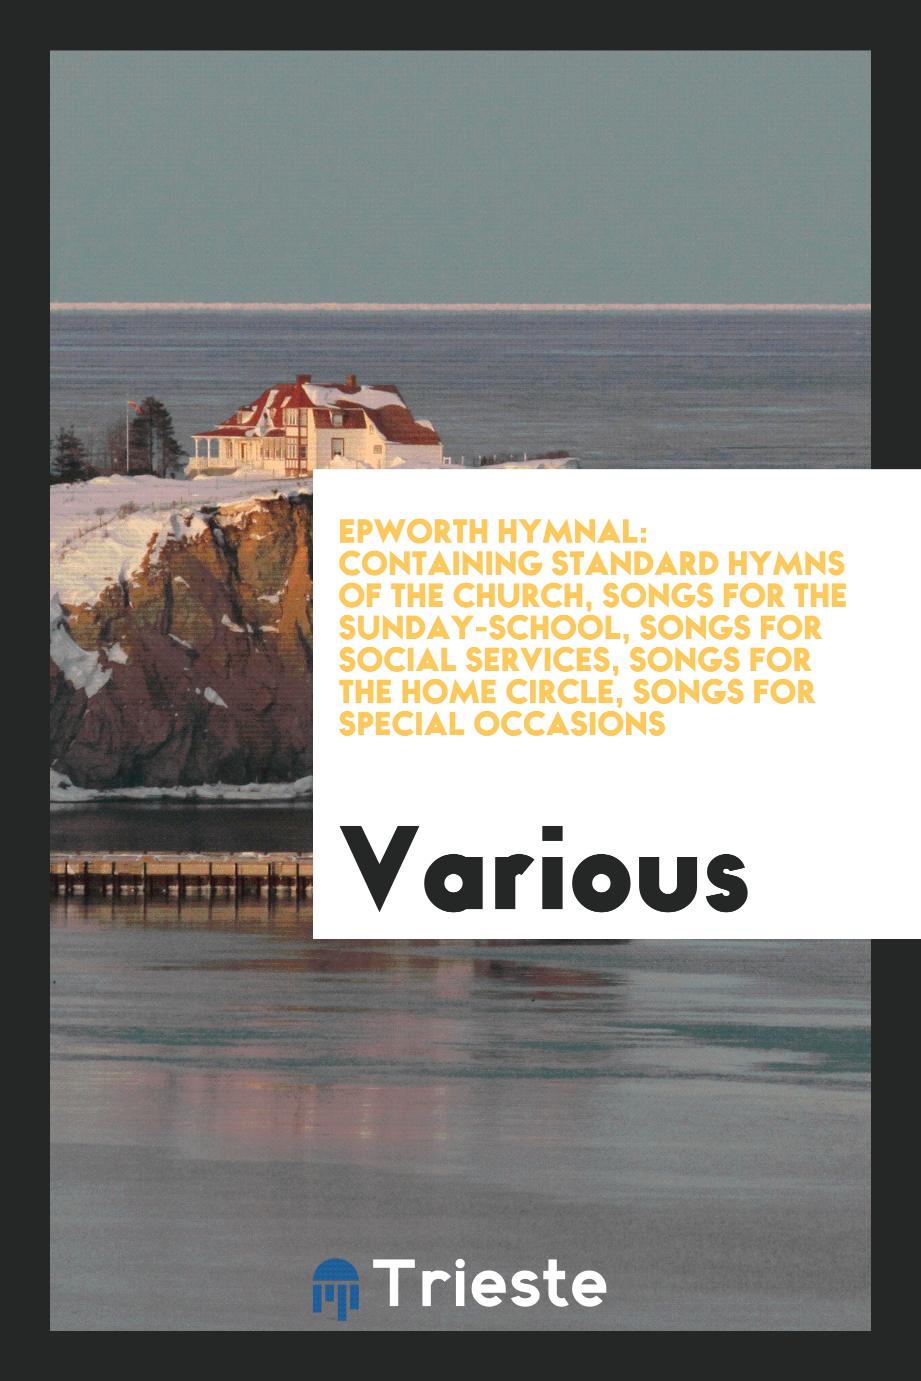 Epworth hymnal: containing standard hymns of the church, songs for the Sunday-school, songs for social services, songs for the home circle, songs for special occasions